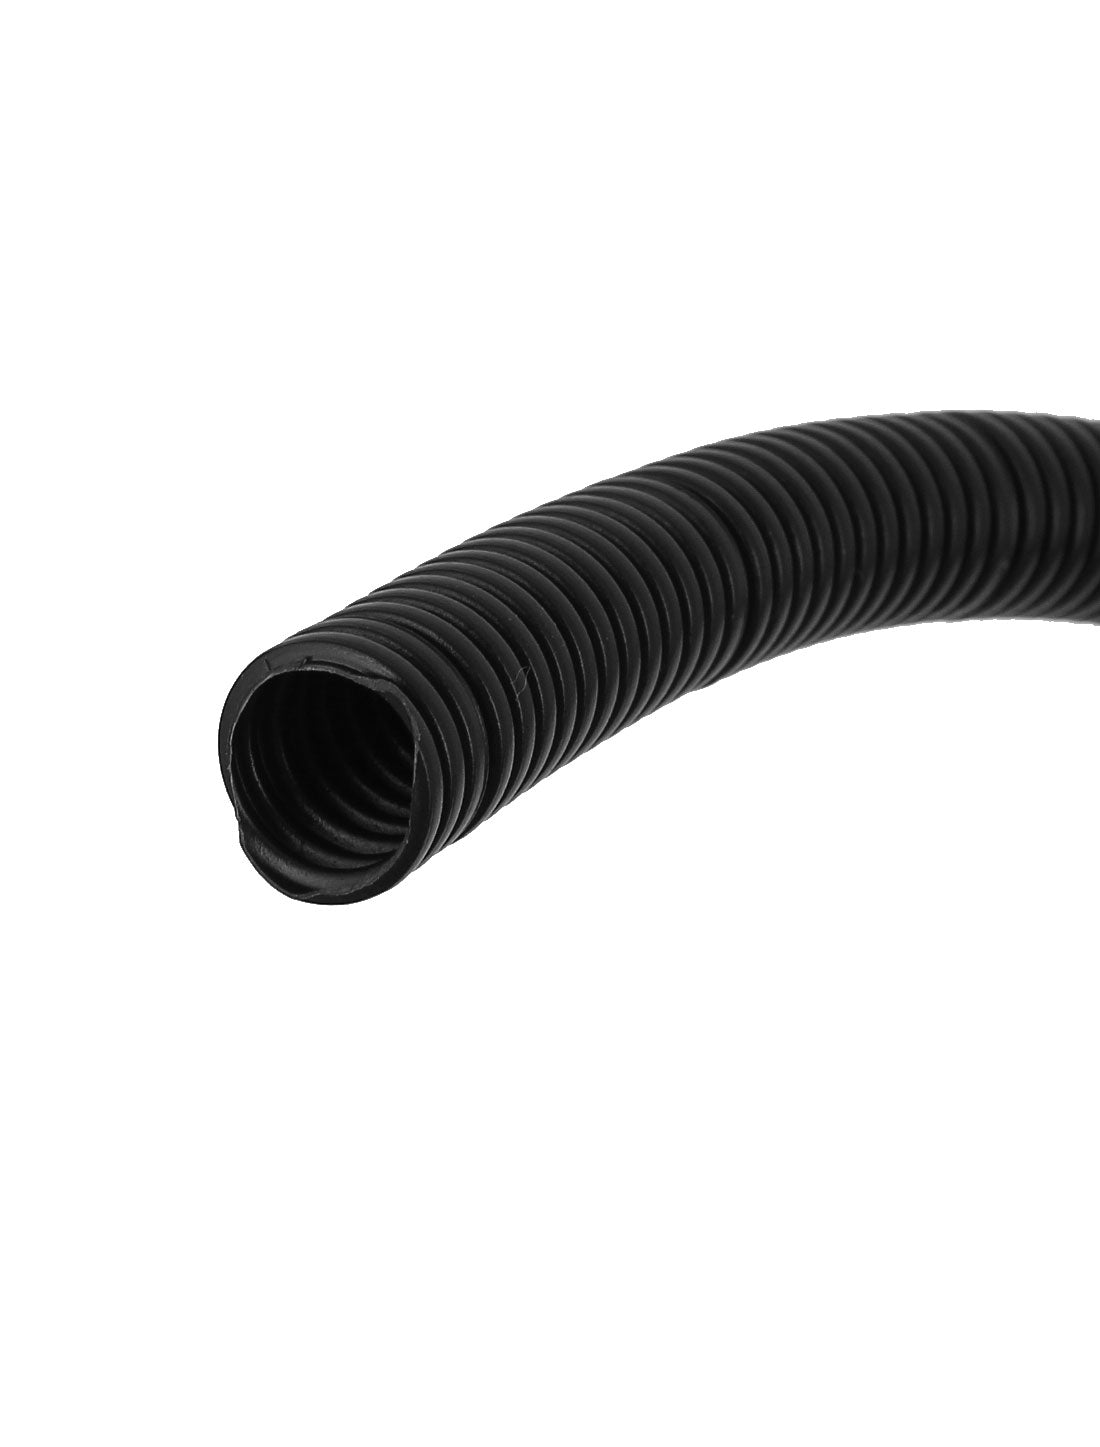 uxcell Uxcell 2.6 M 10 x 13 mm Plastic Corrugated Conduit Tube for Garden,Office Black